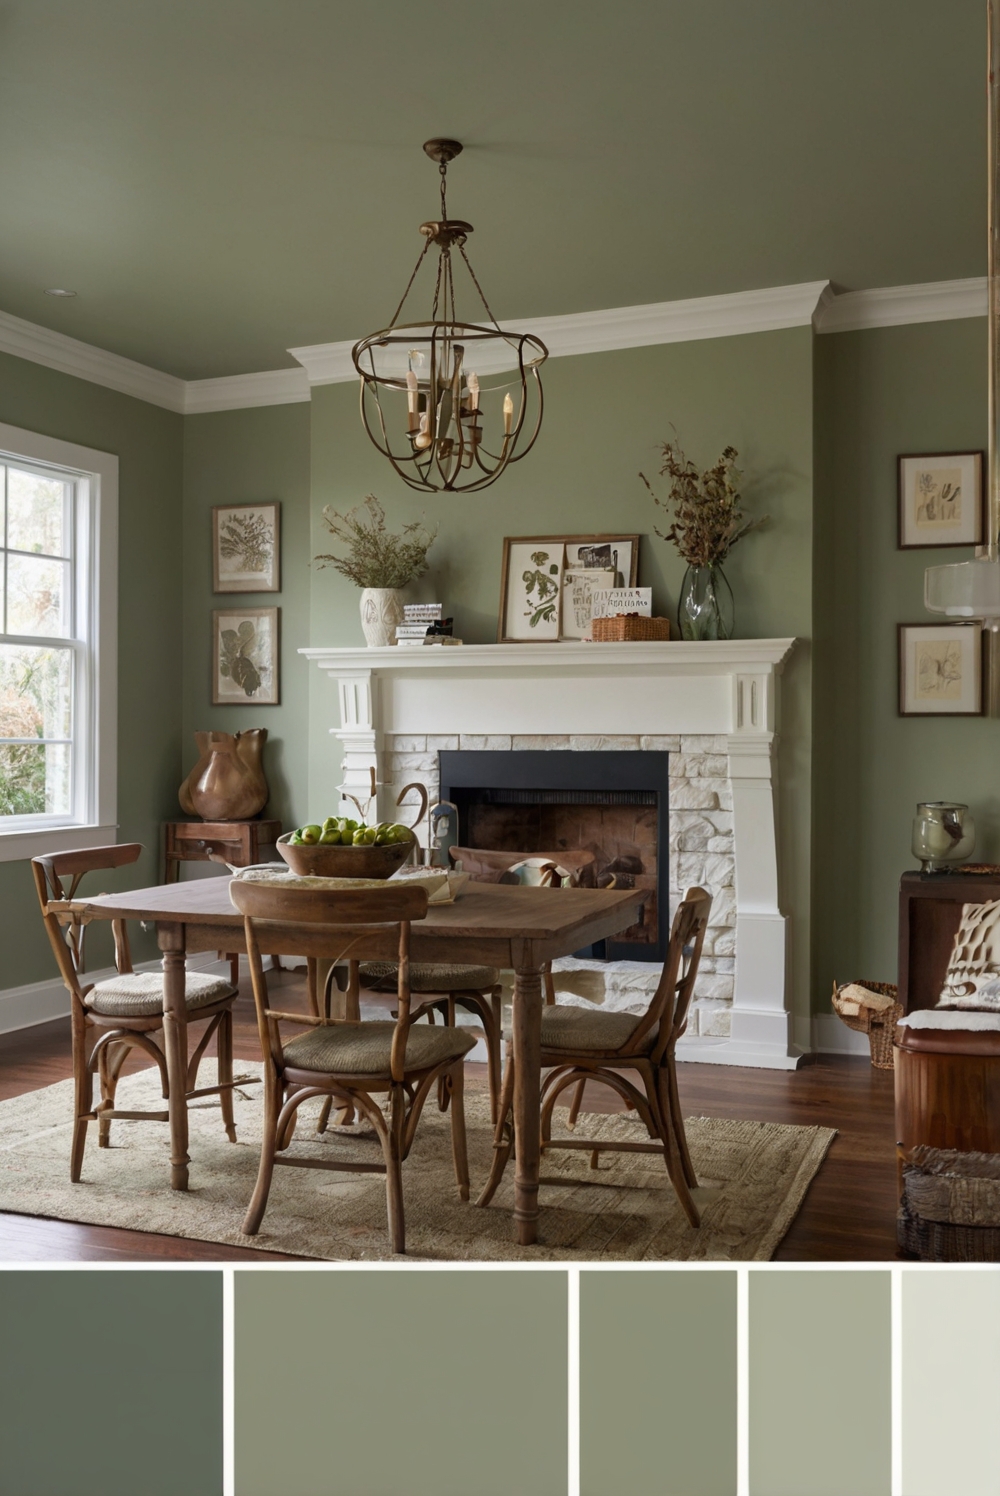 Benjamin Moore paint colors, interior design services, design consultation, space planning and interior design, kitchen renovations, living room decor, wall paint colors